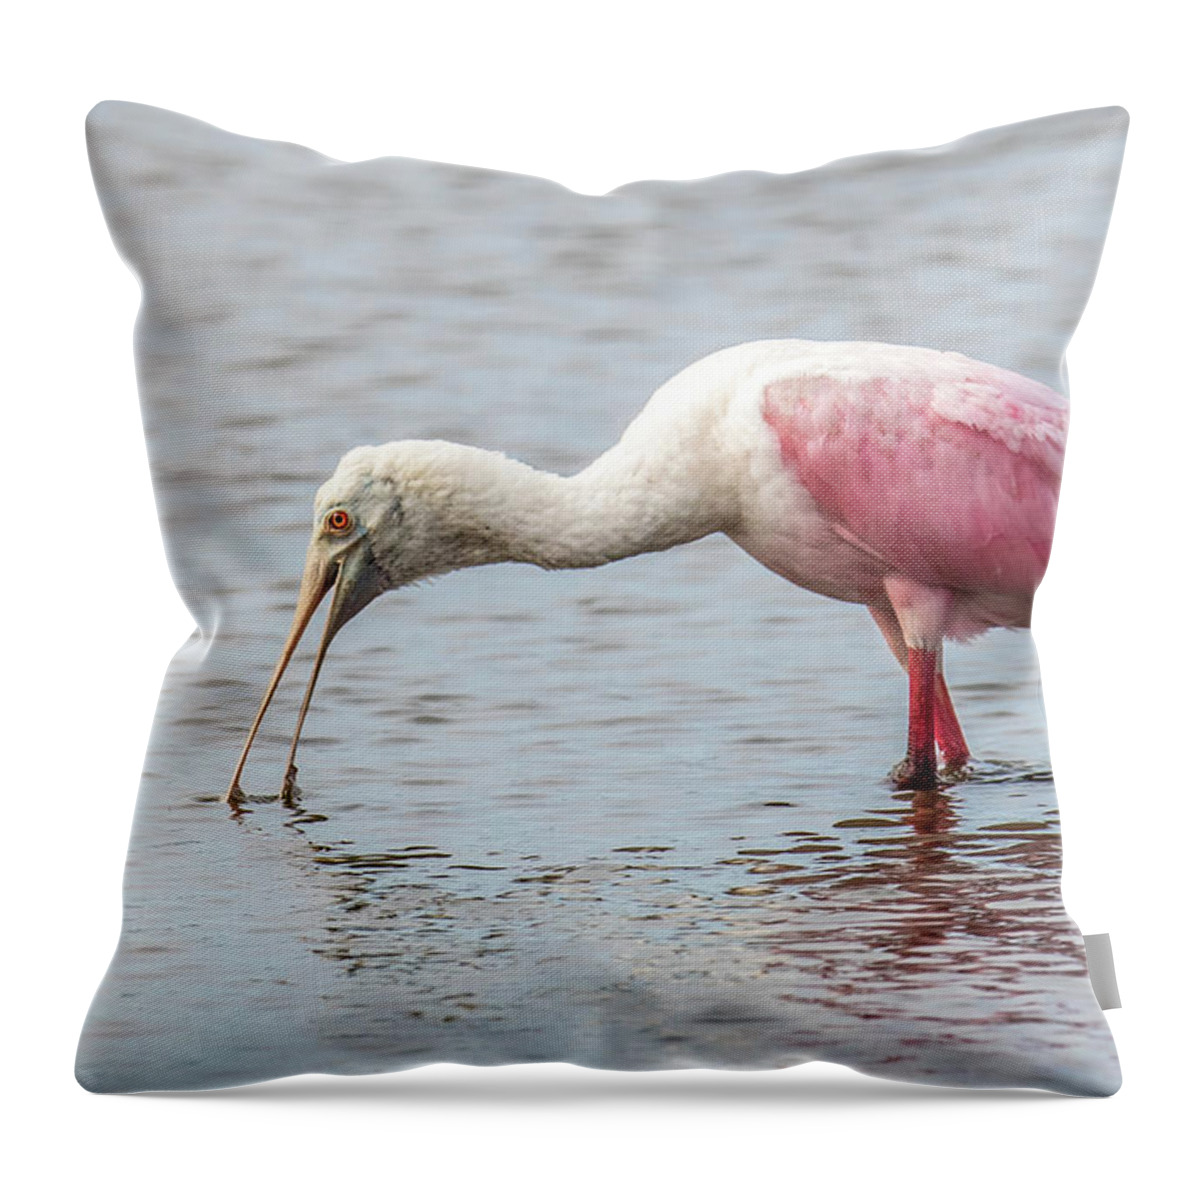 Roseate Spoonbill Throw Pillow featuring the photograph Roseate Spoonbill by Paul Freidlund